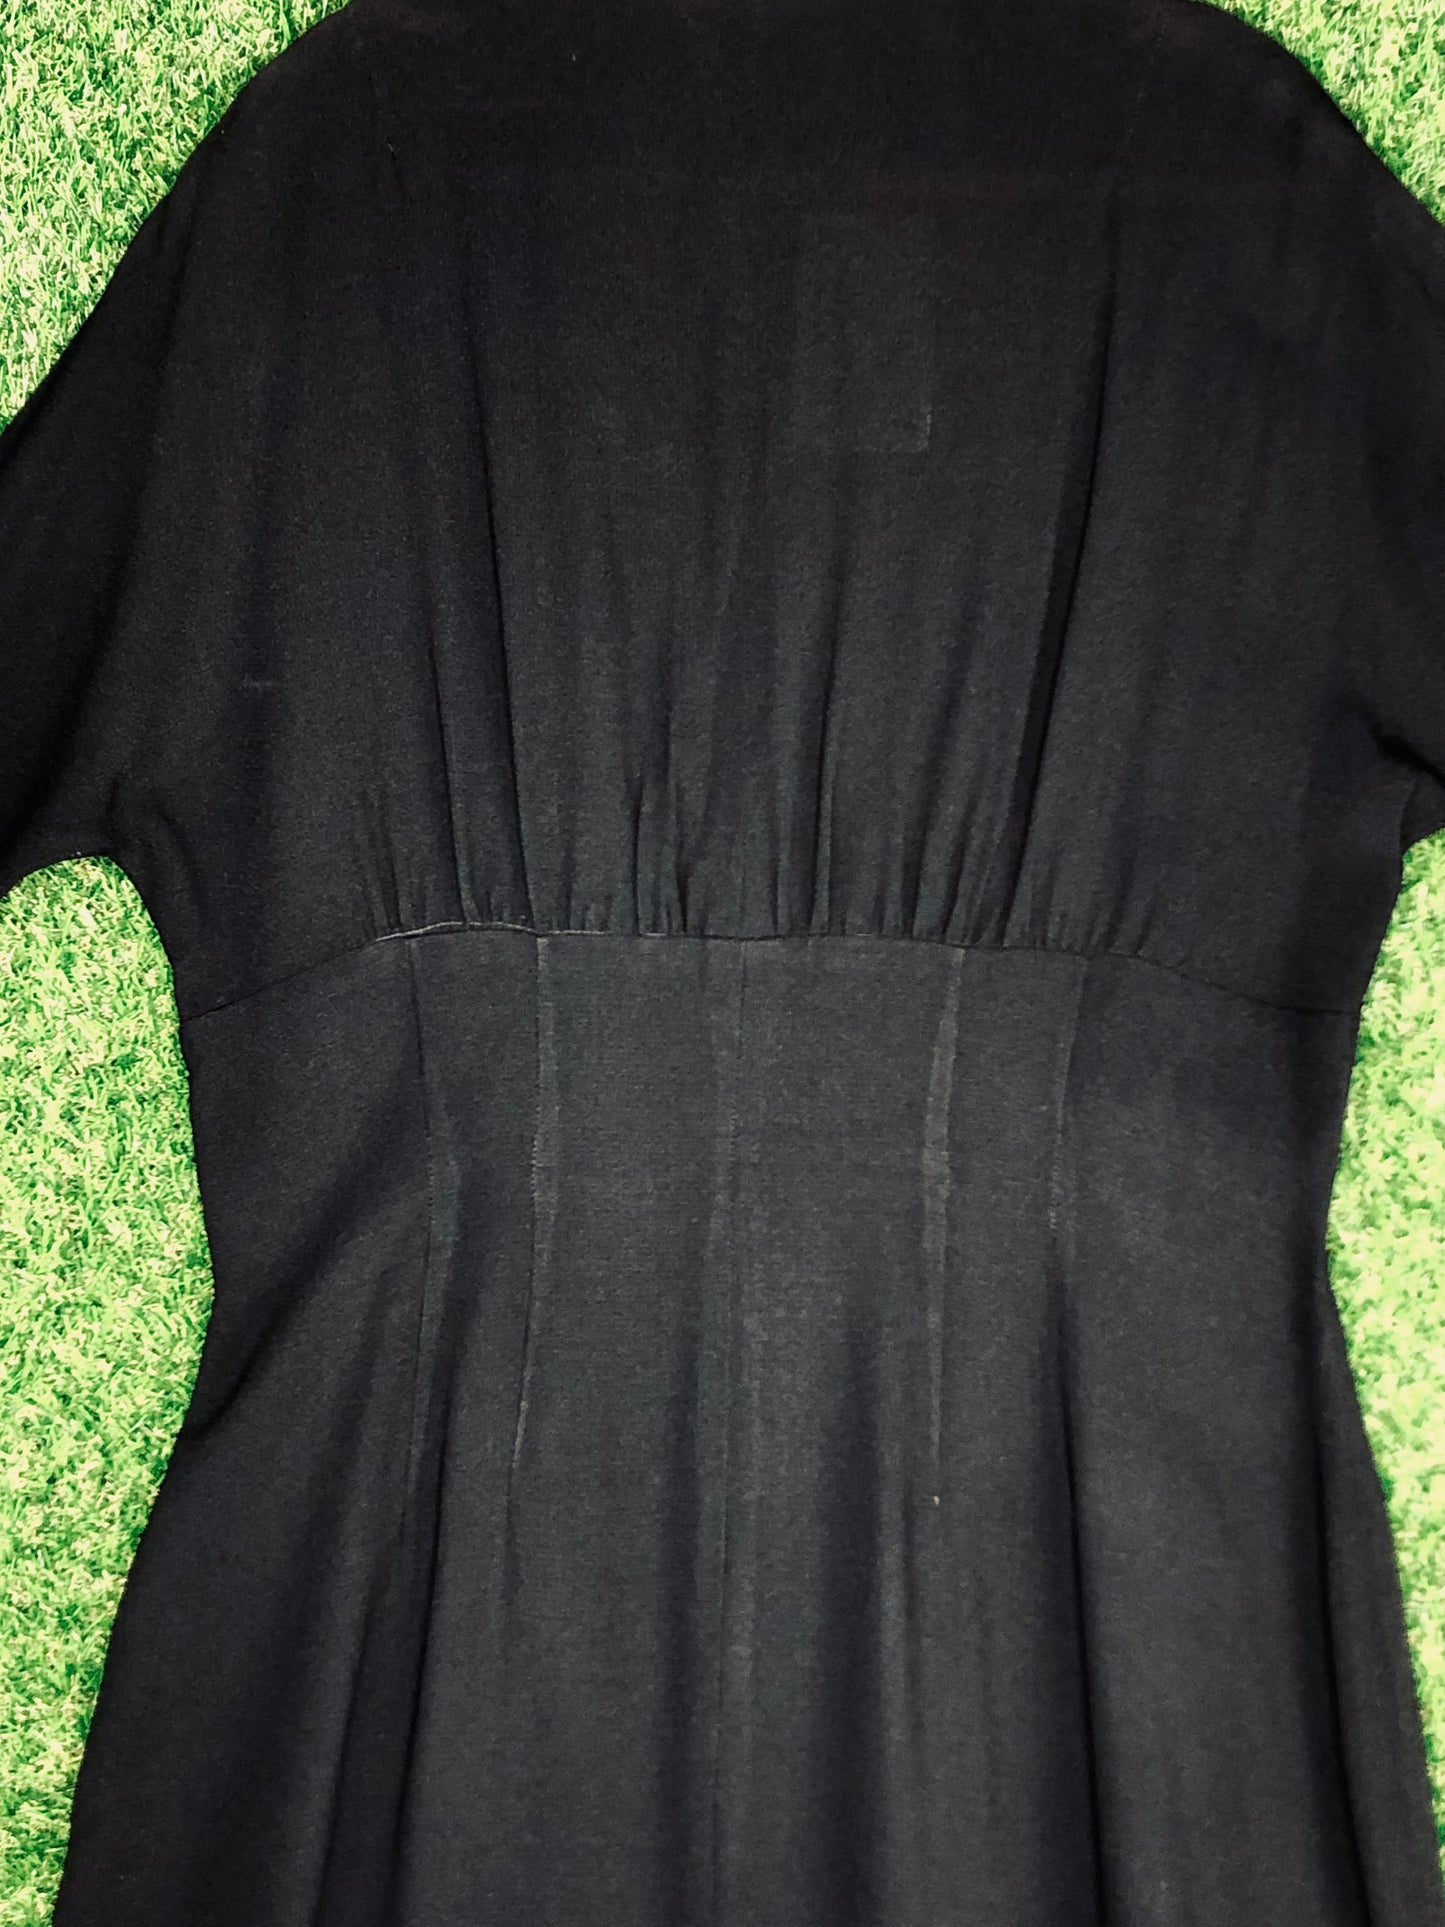 1950's 'Marilyn Monroe' Classic Little Black Dress With Bow Accents